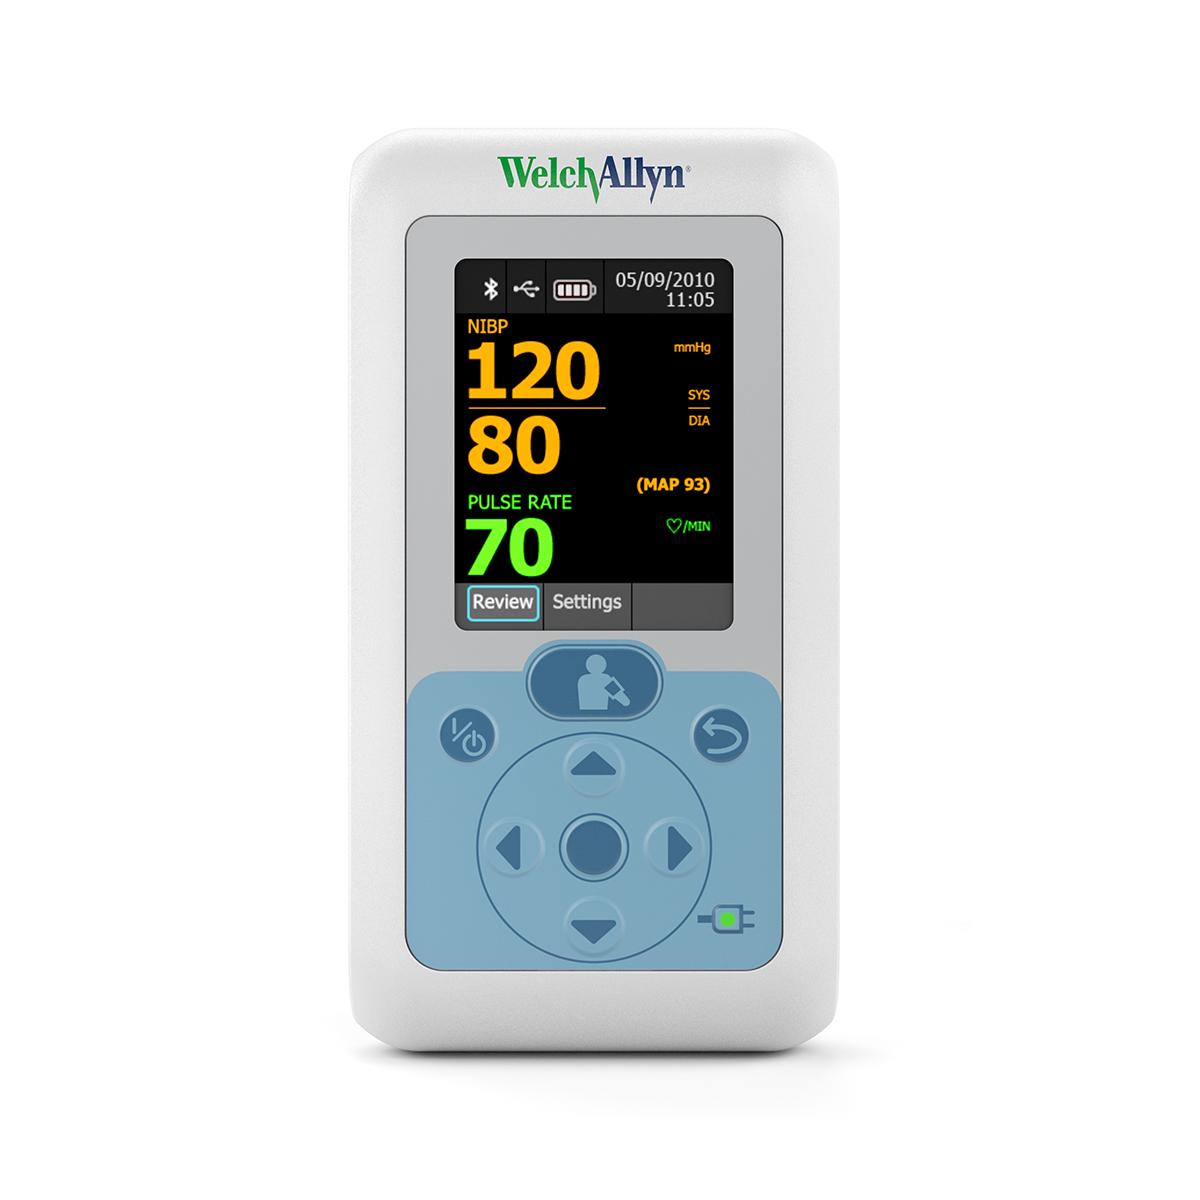 Welch Allyn ProBP 3400 Blood Pressure Device